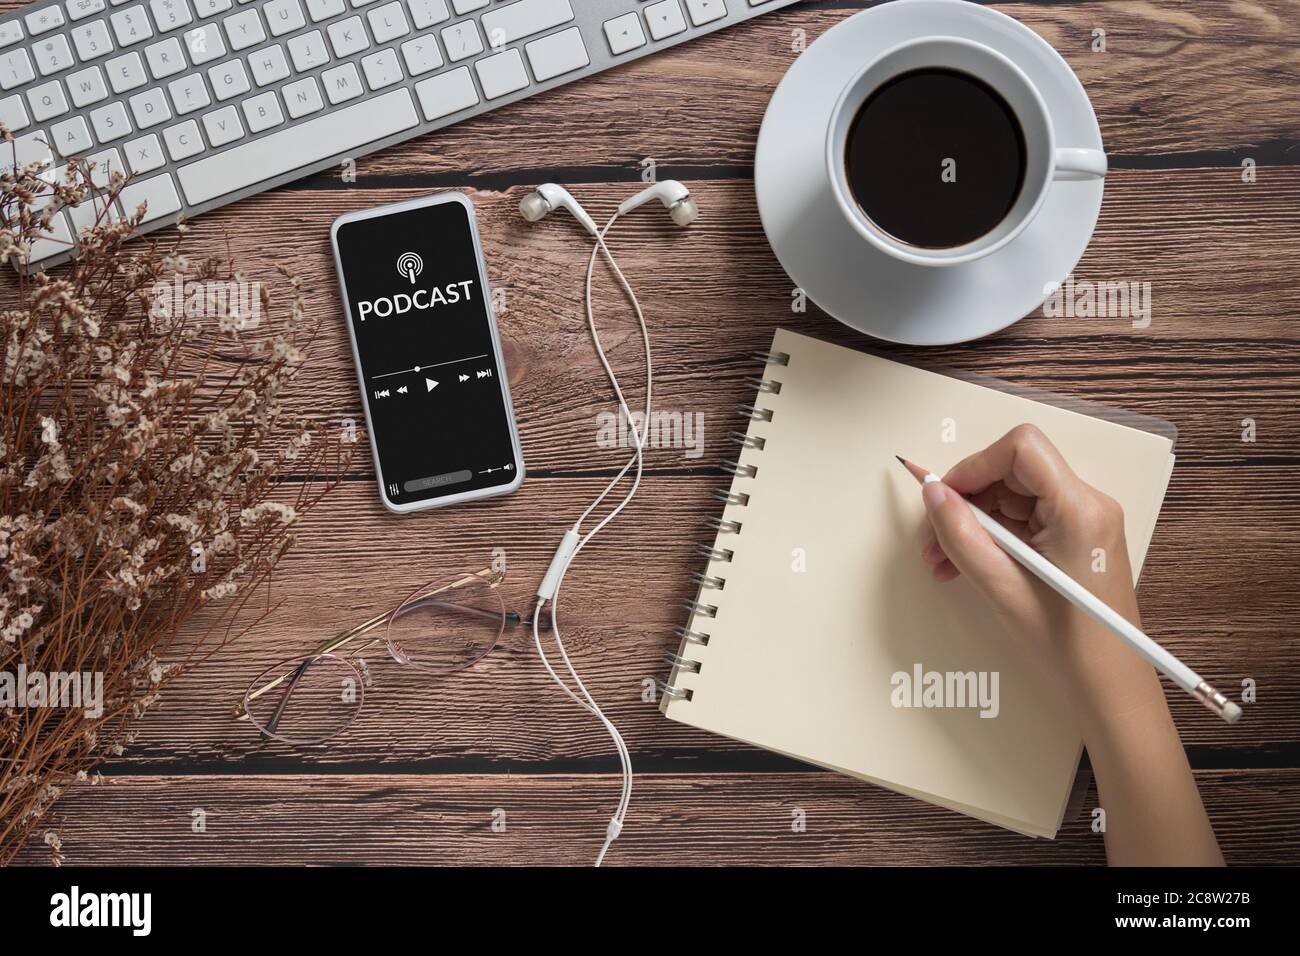 podcast audio content concept. podcast application on mobile smartphone screen on wooden table with coffee cup, earphones, glasses, notebook, pencil Stock Photo